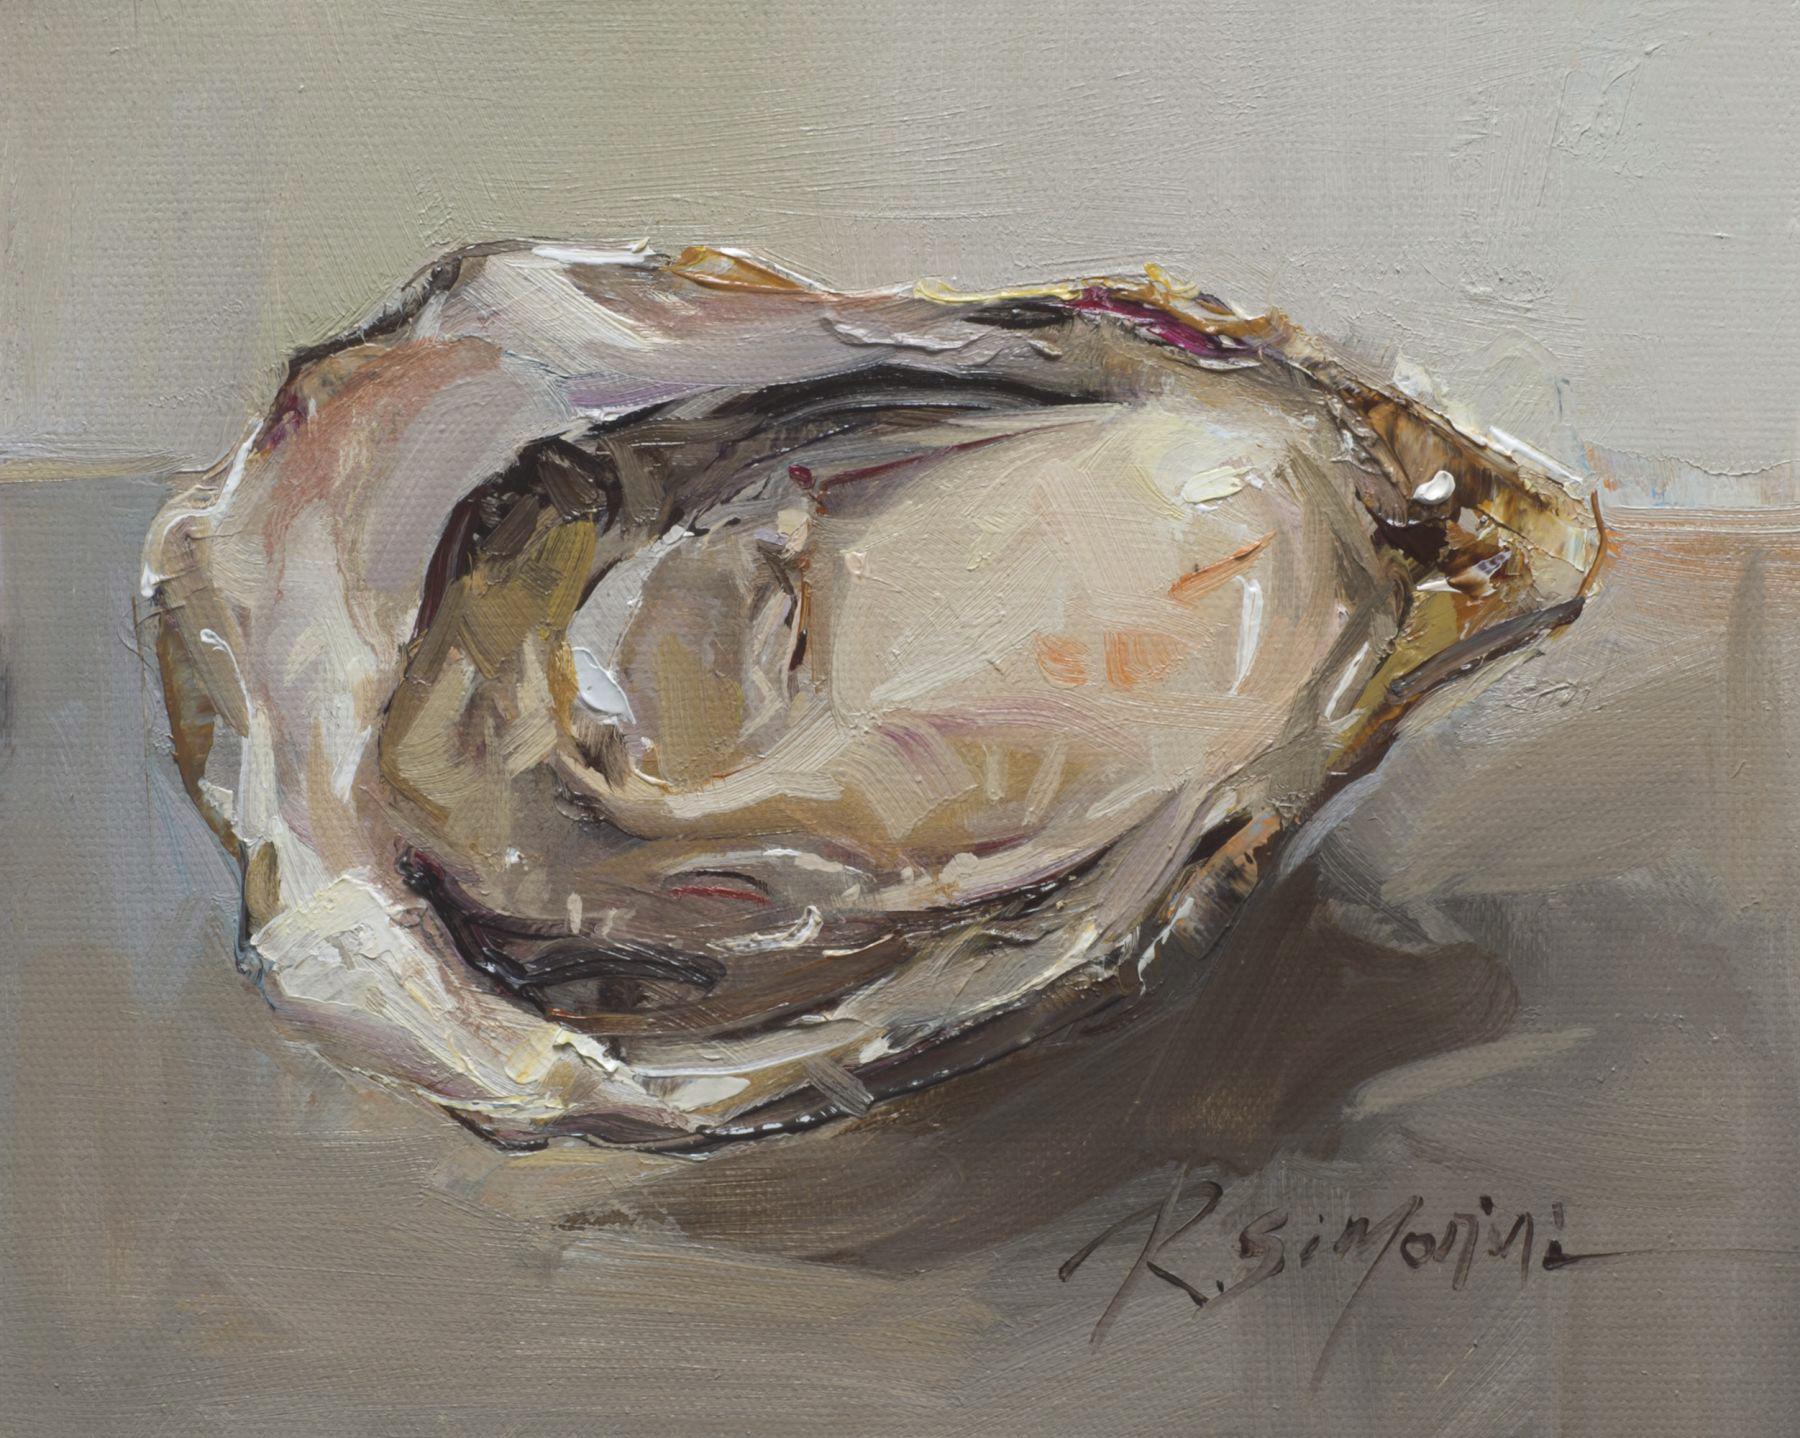 Ray Simonini "Shy is the Oyster" 8x10 Shell Impressionist Oil Painting on Canvas